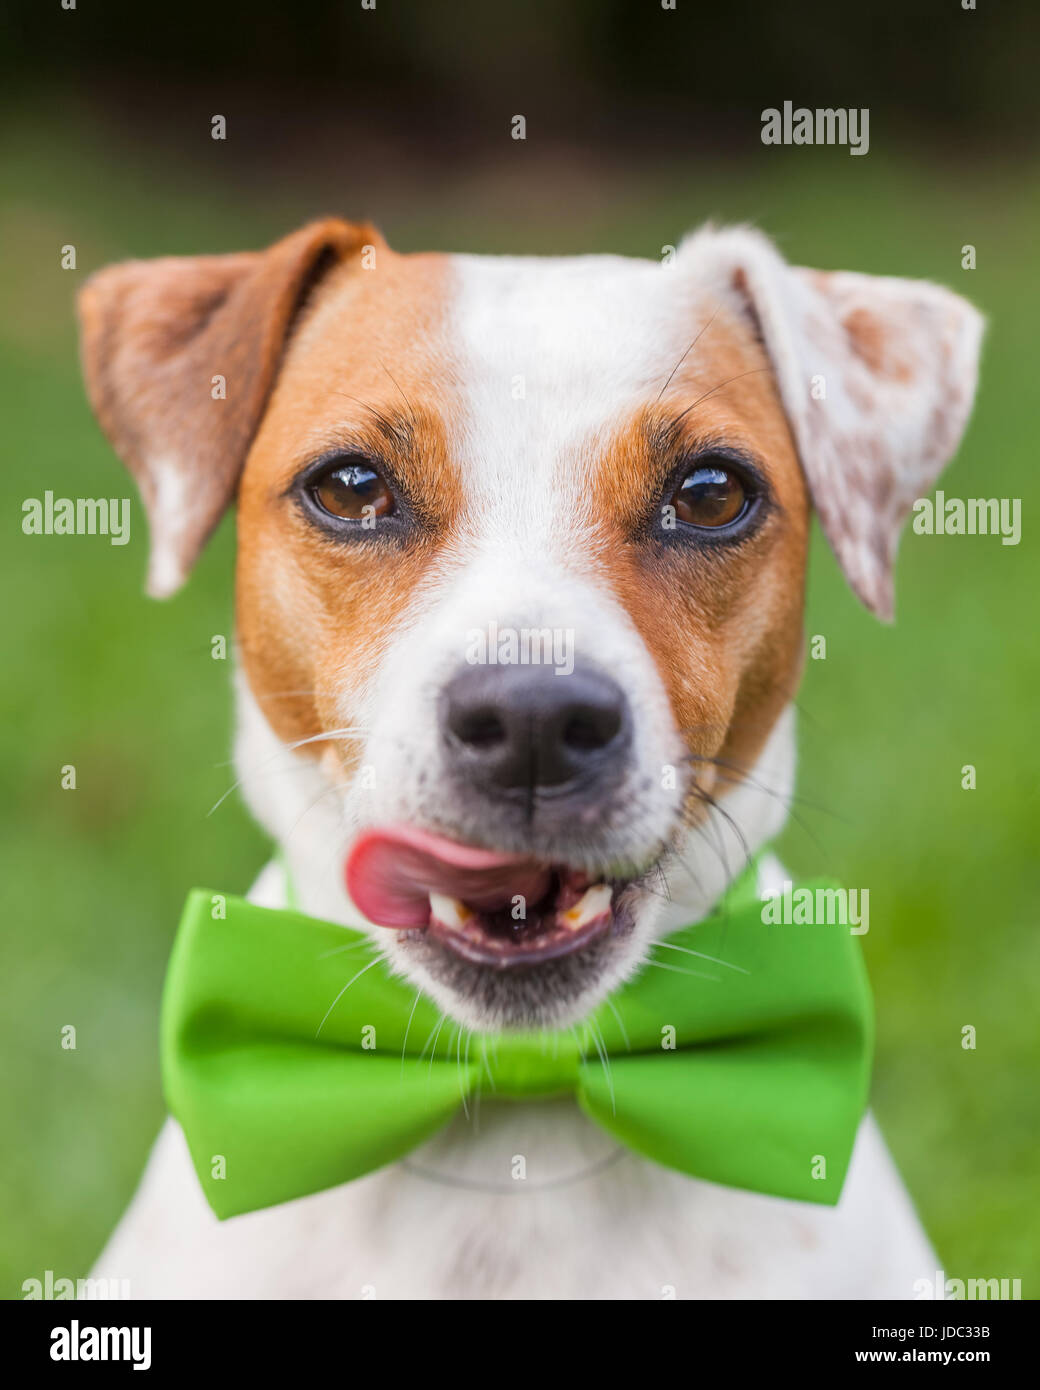 Jack Russell Terrier Female Dog With A Green Tie Stock Photo